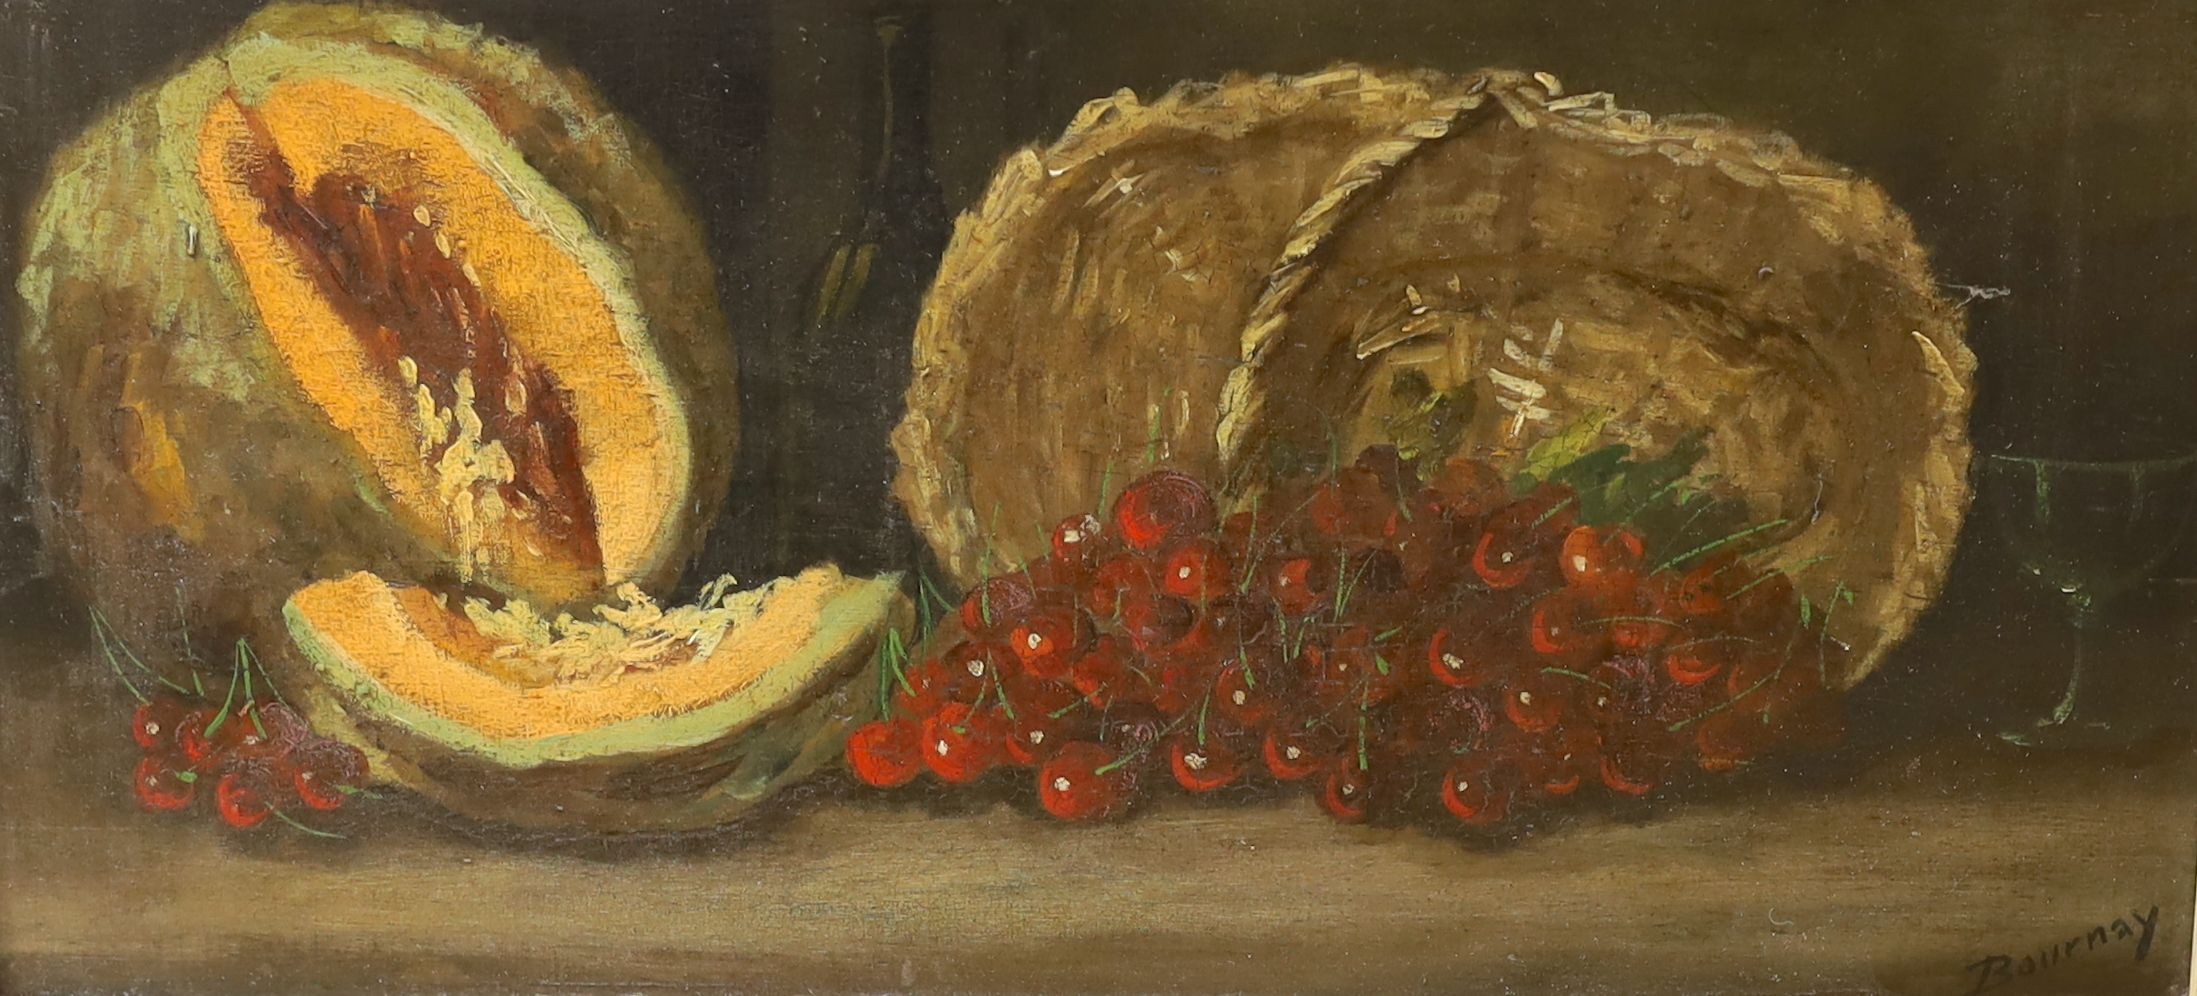 Bournay, pair of oils on panel, Still lifes of fruit, signed, 16 x 34cm